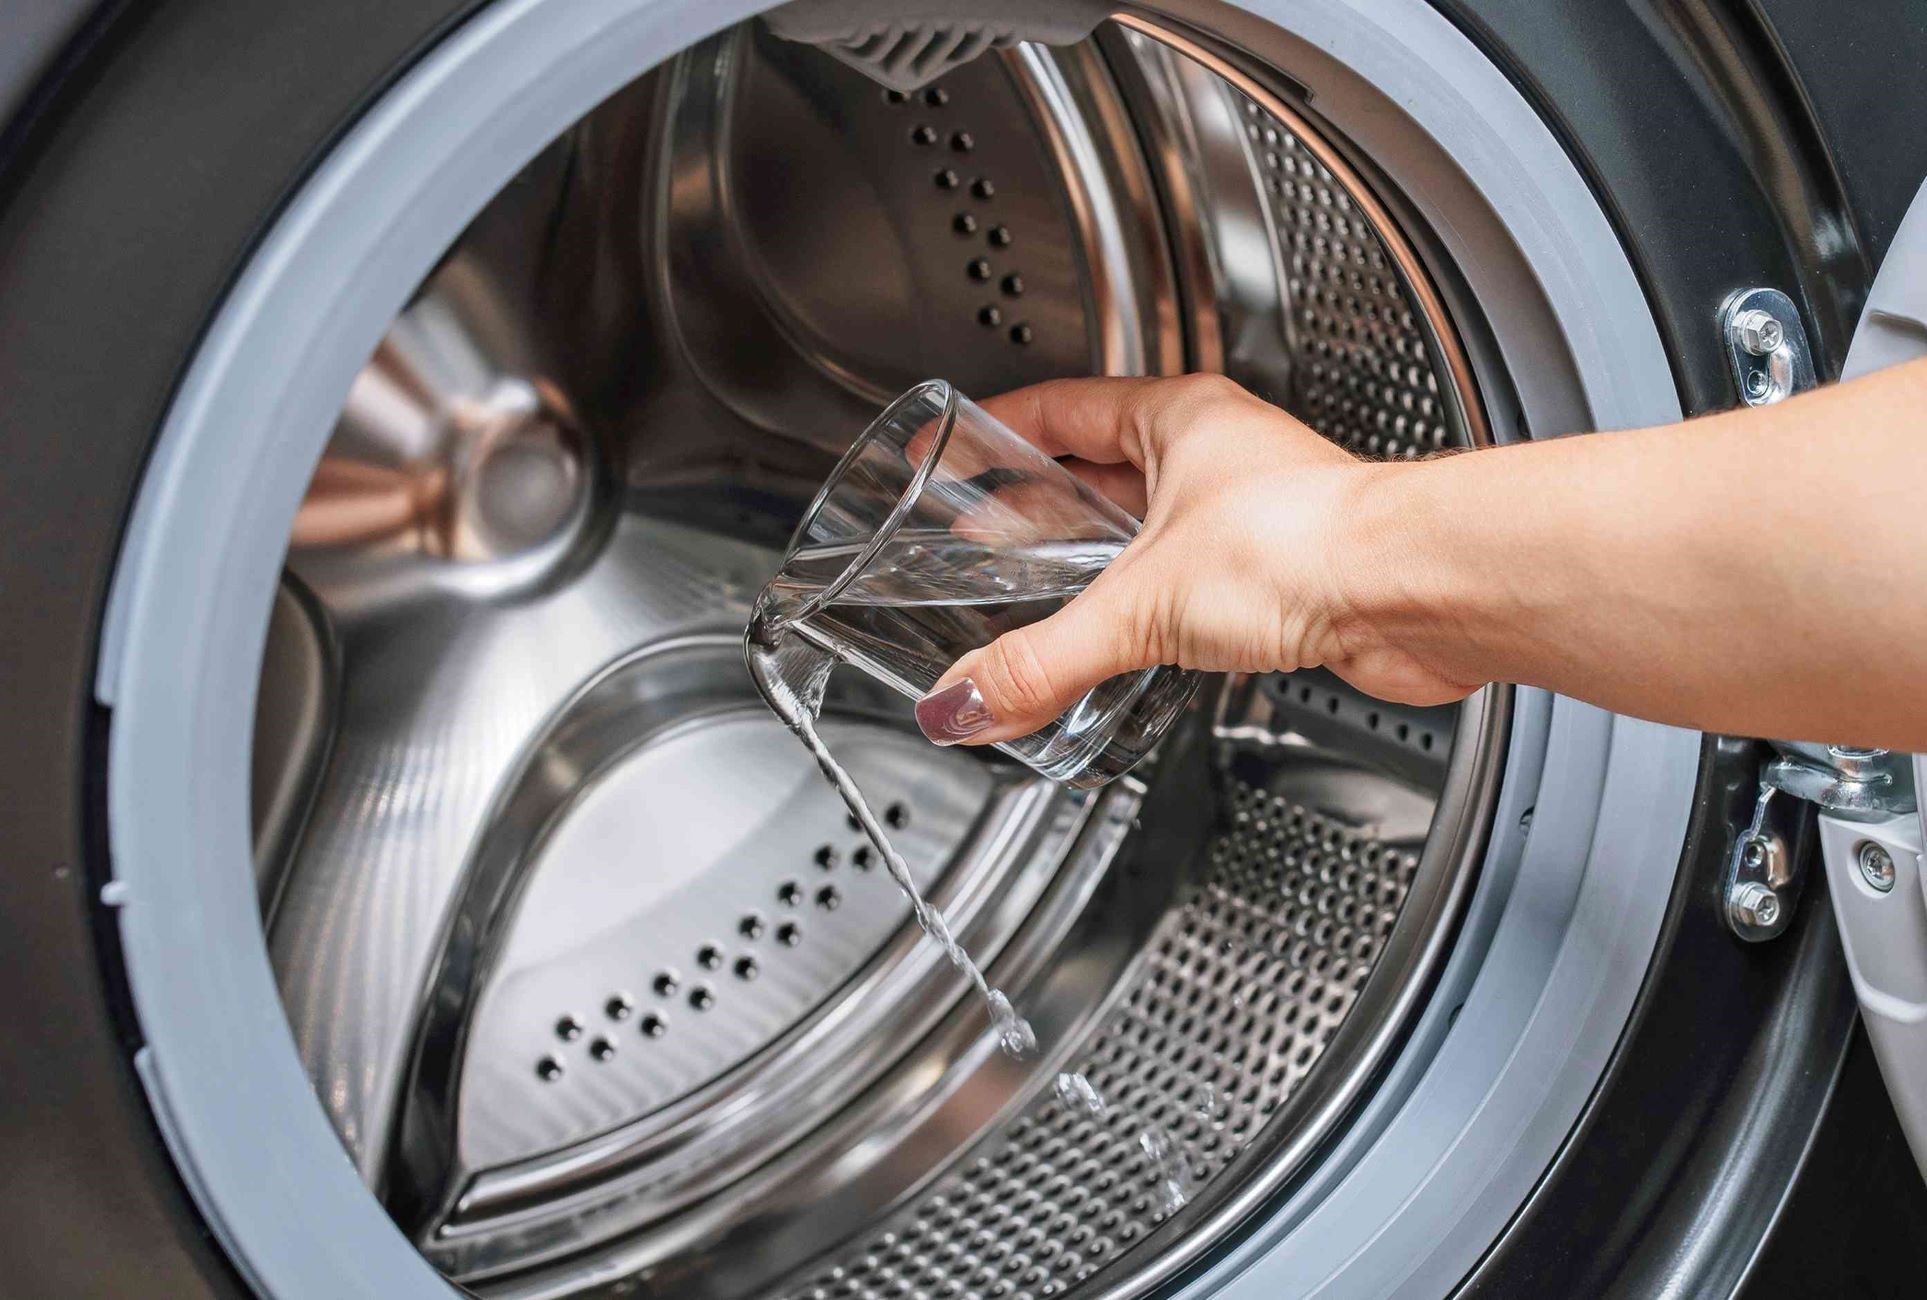 How To Clean The Drum Of A Washing Machine